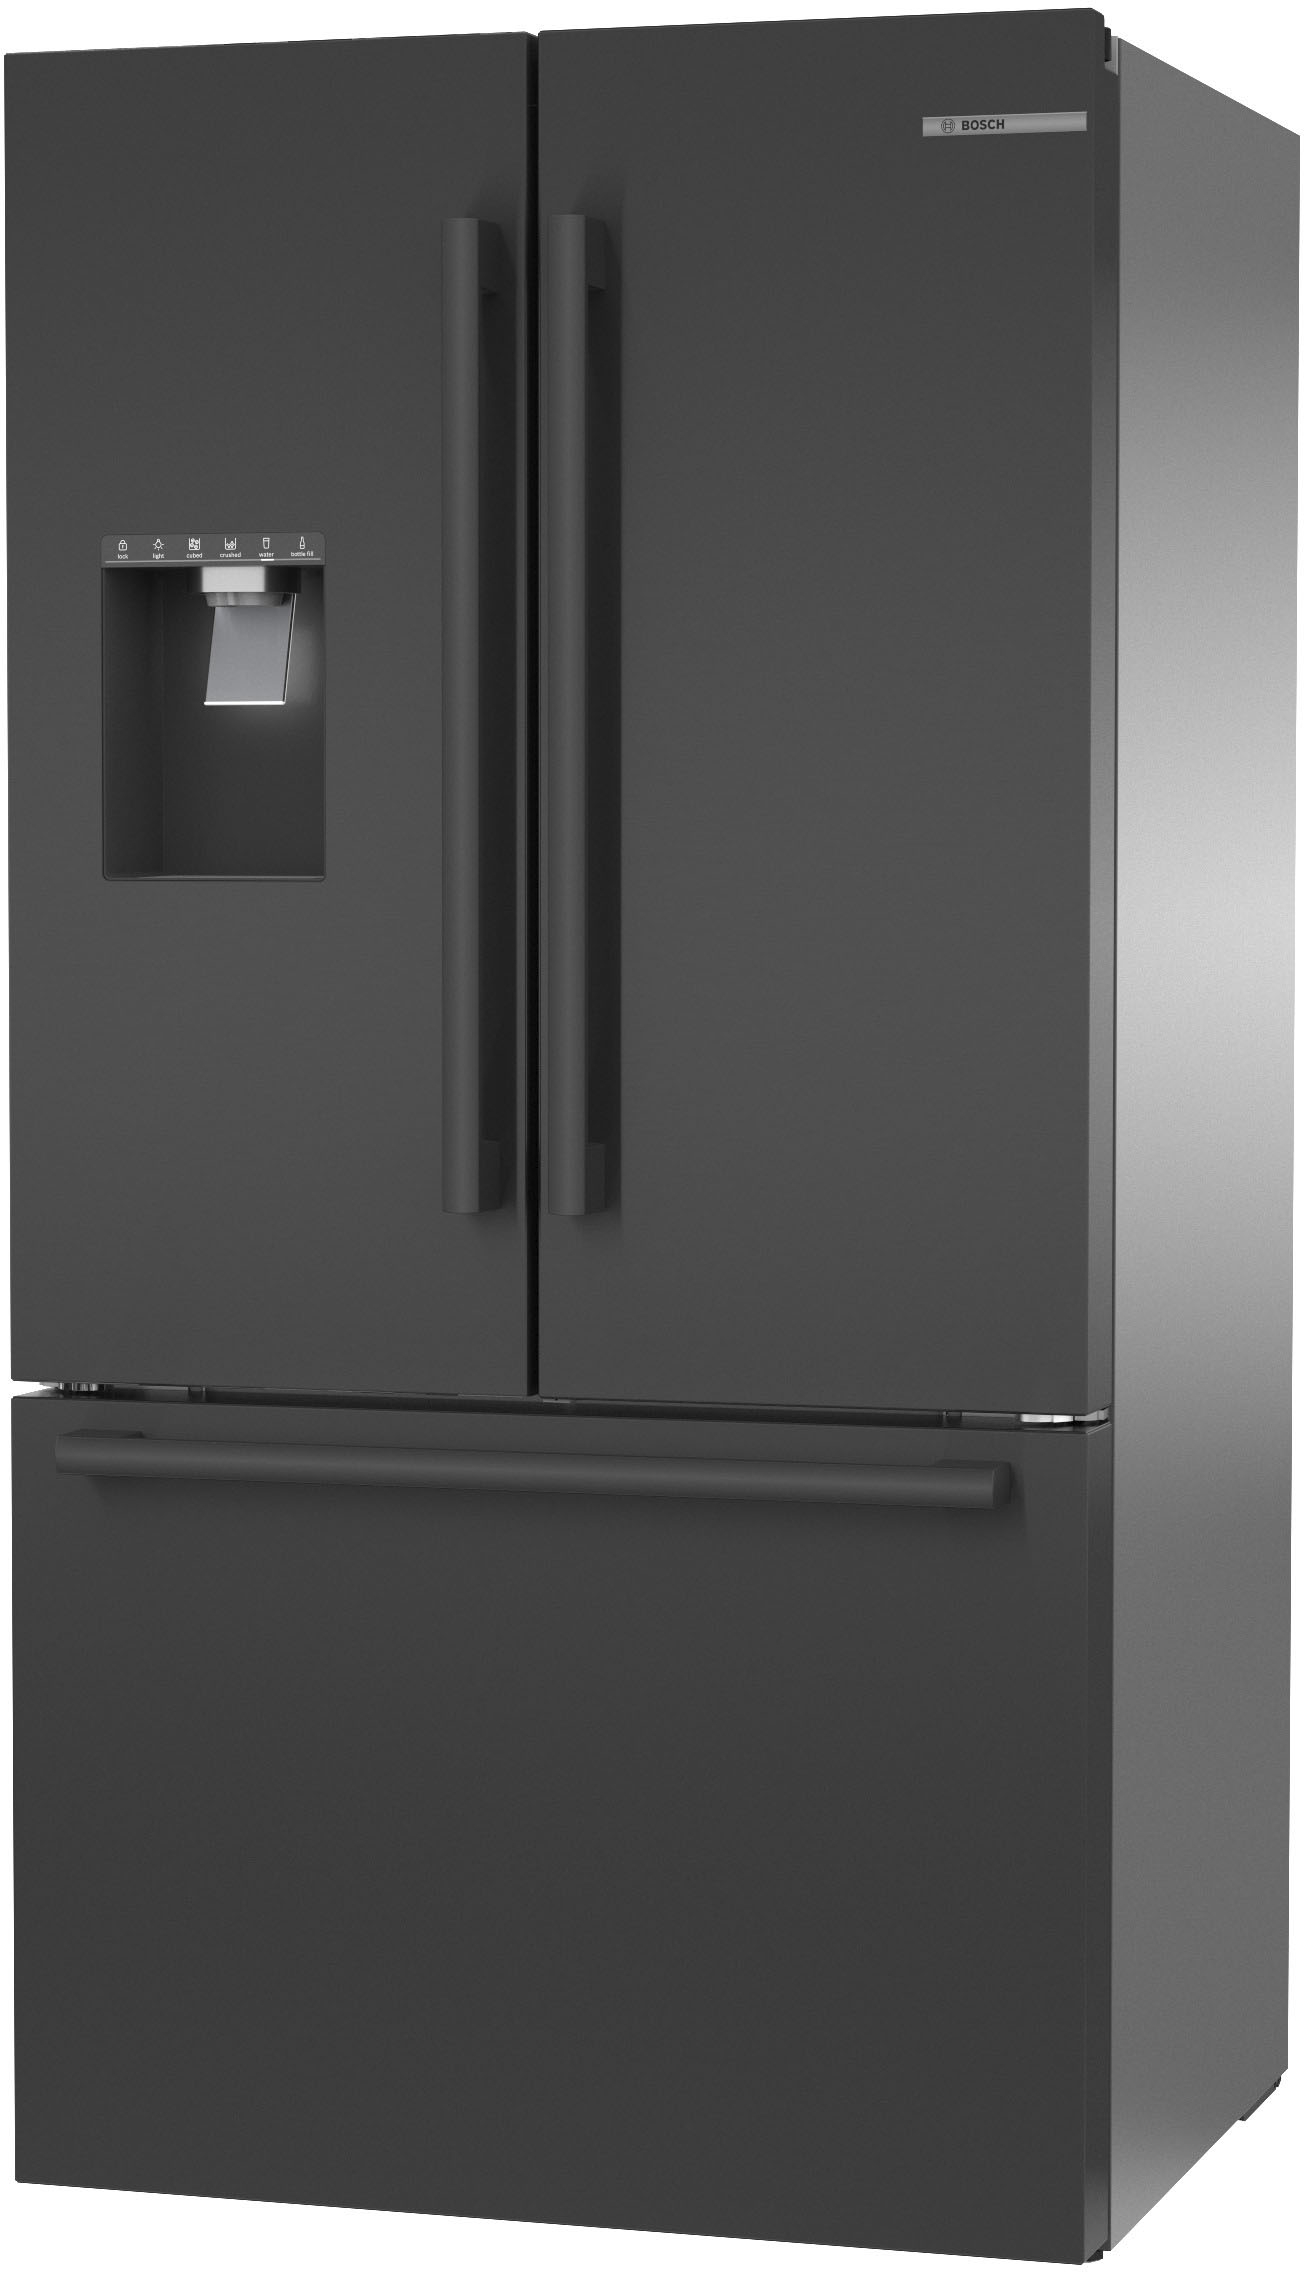 Left View: Bosch - 500 Series 26 Cu. Ft. French Door Smart Refrigerator with External Water and Ice - Black Stainless Steel